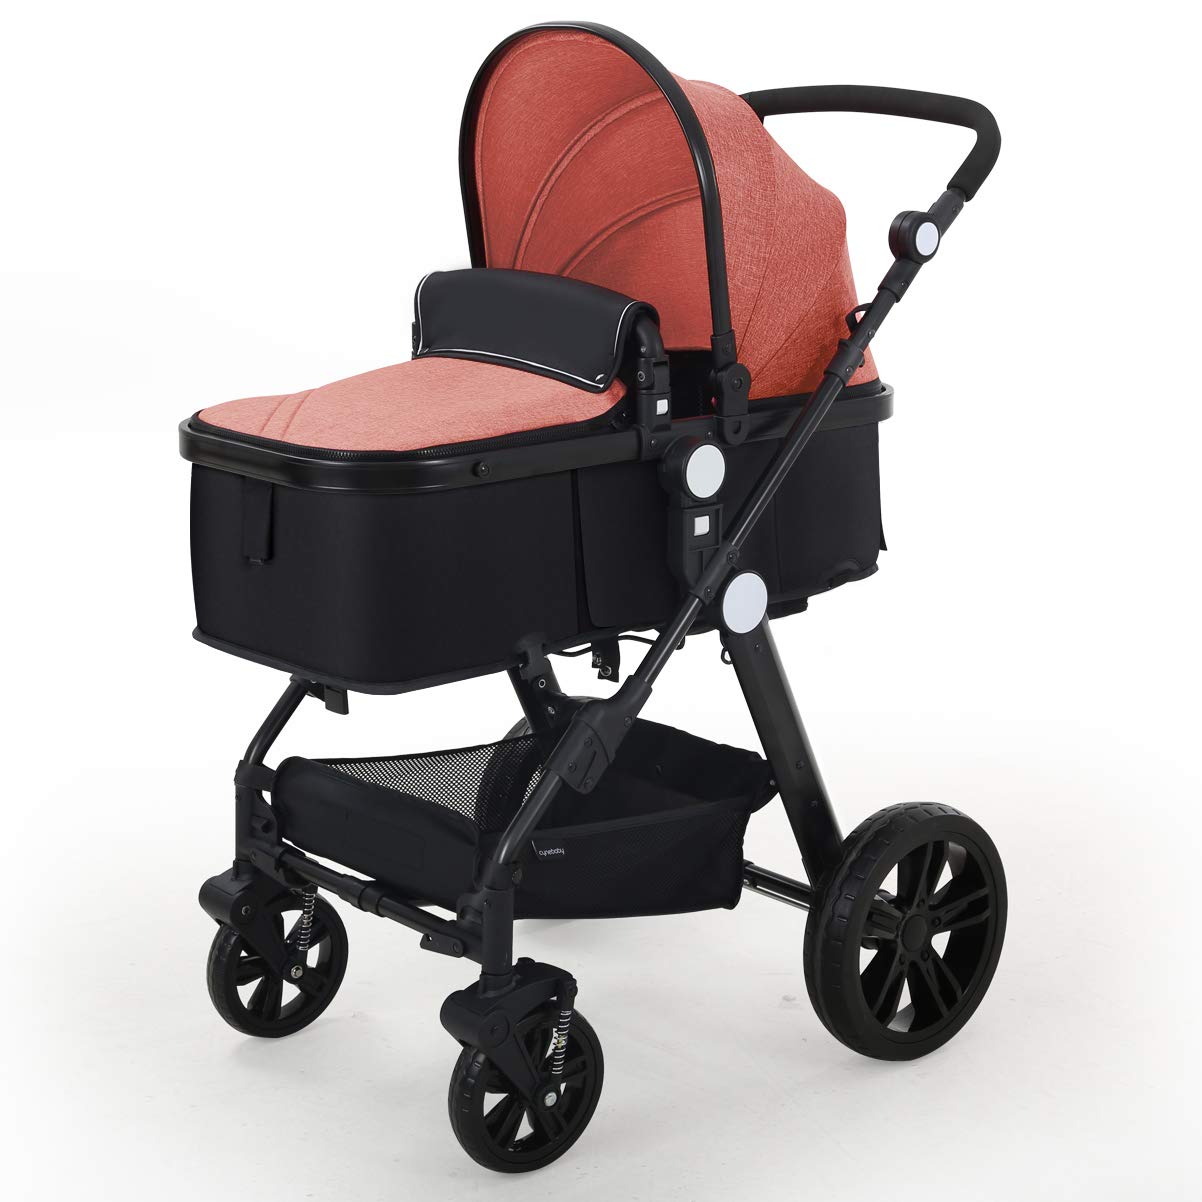 stroller for newborn and toddler